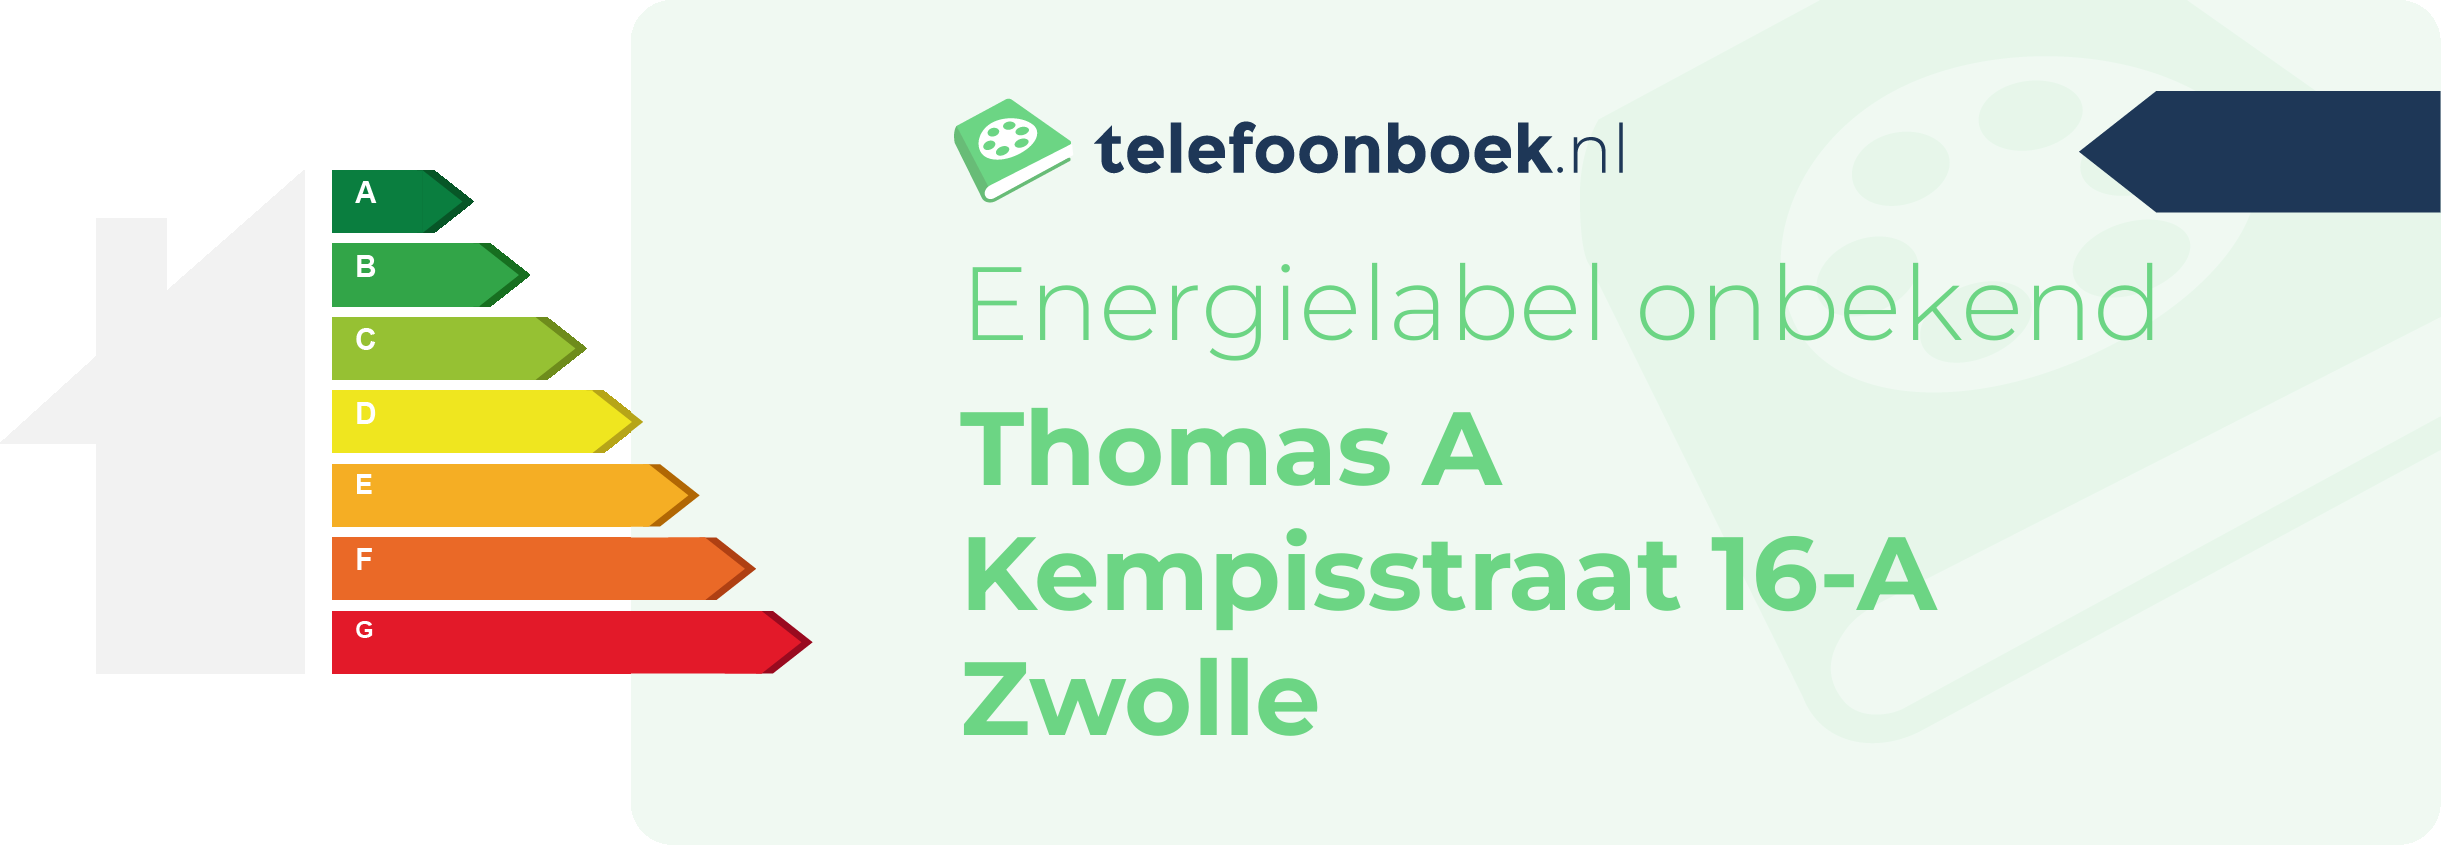 Energielabel Thomas A Kempisstraat 16-A Zwolle